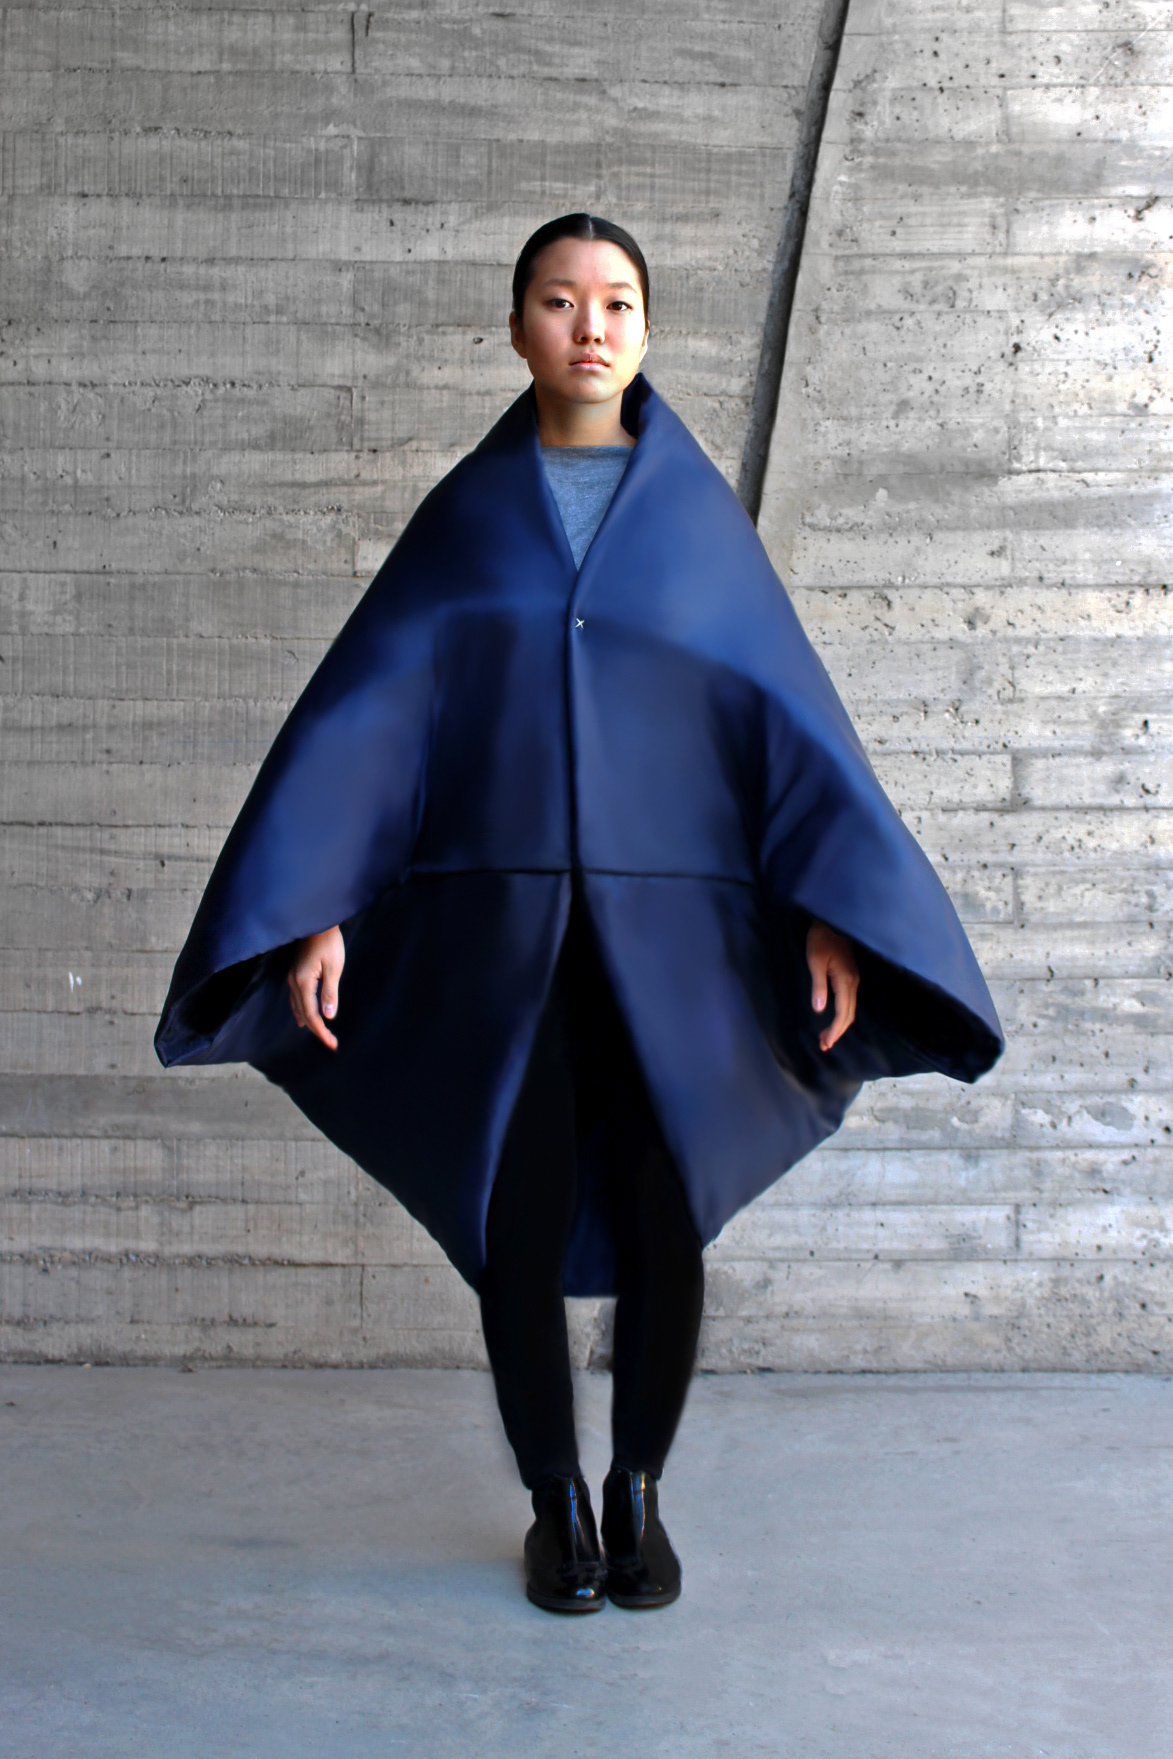 padding quilted geisha experimental garment Structural